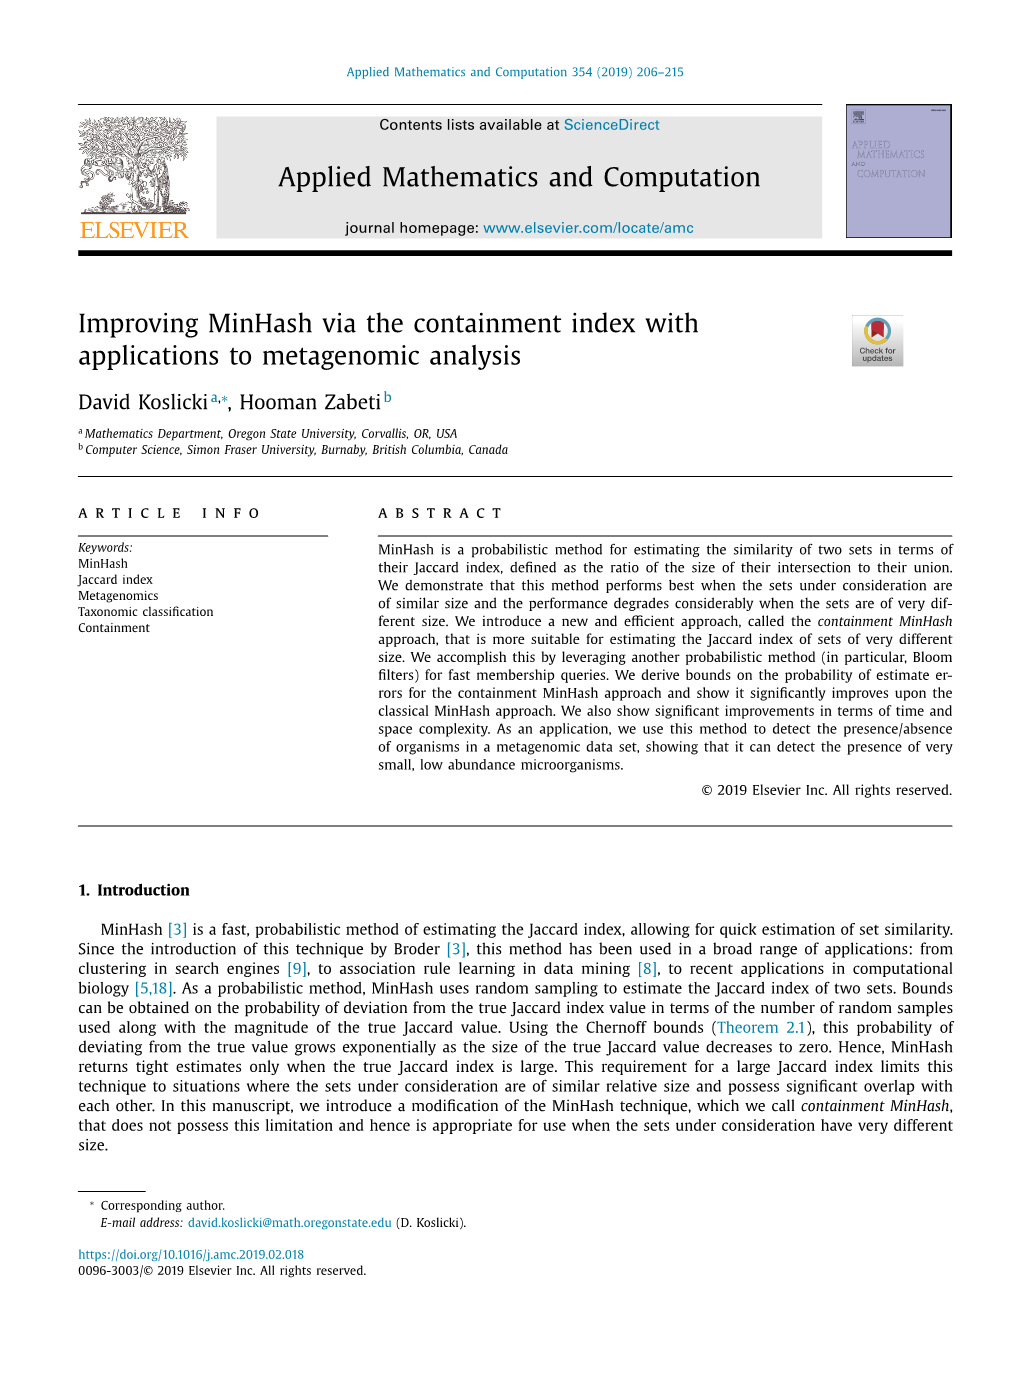 Improving Minhash Via the Containment Index with Applications to Metagenomic Analysis